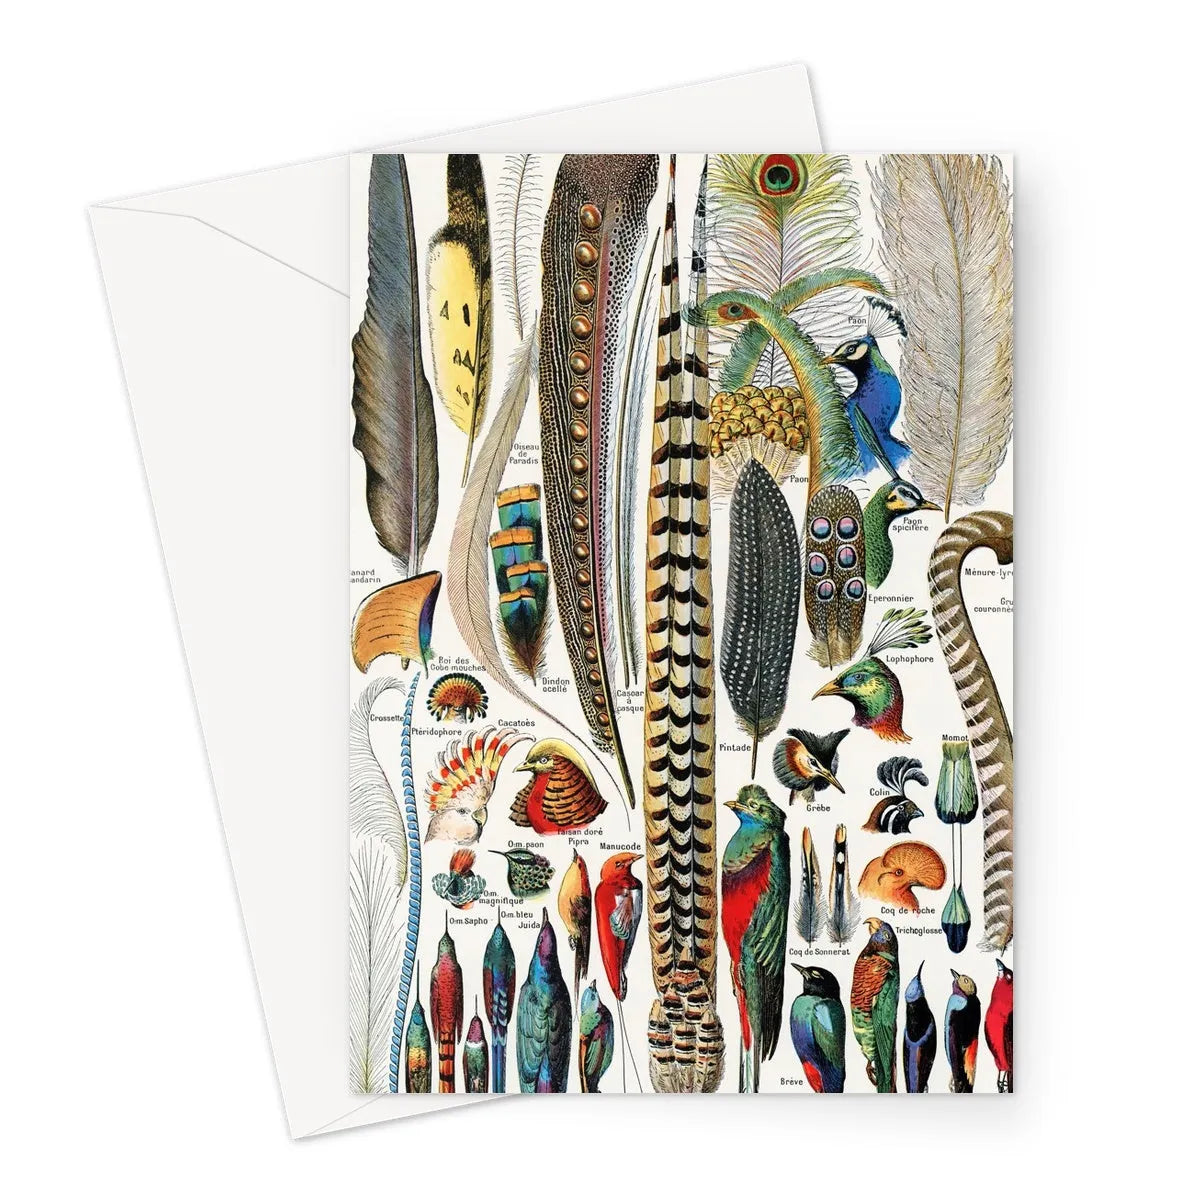 Plumes - Feathers By Adolphe Millot Greeting Card - A5 Portrait / 1 Card - Notebooks & Notepads - Aesthetic Art